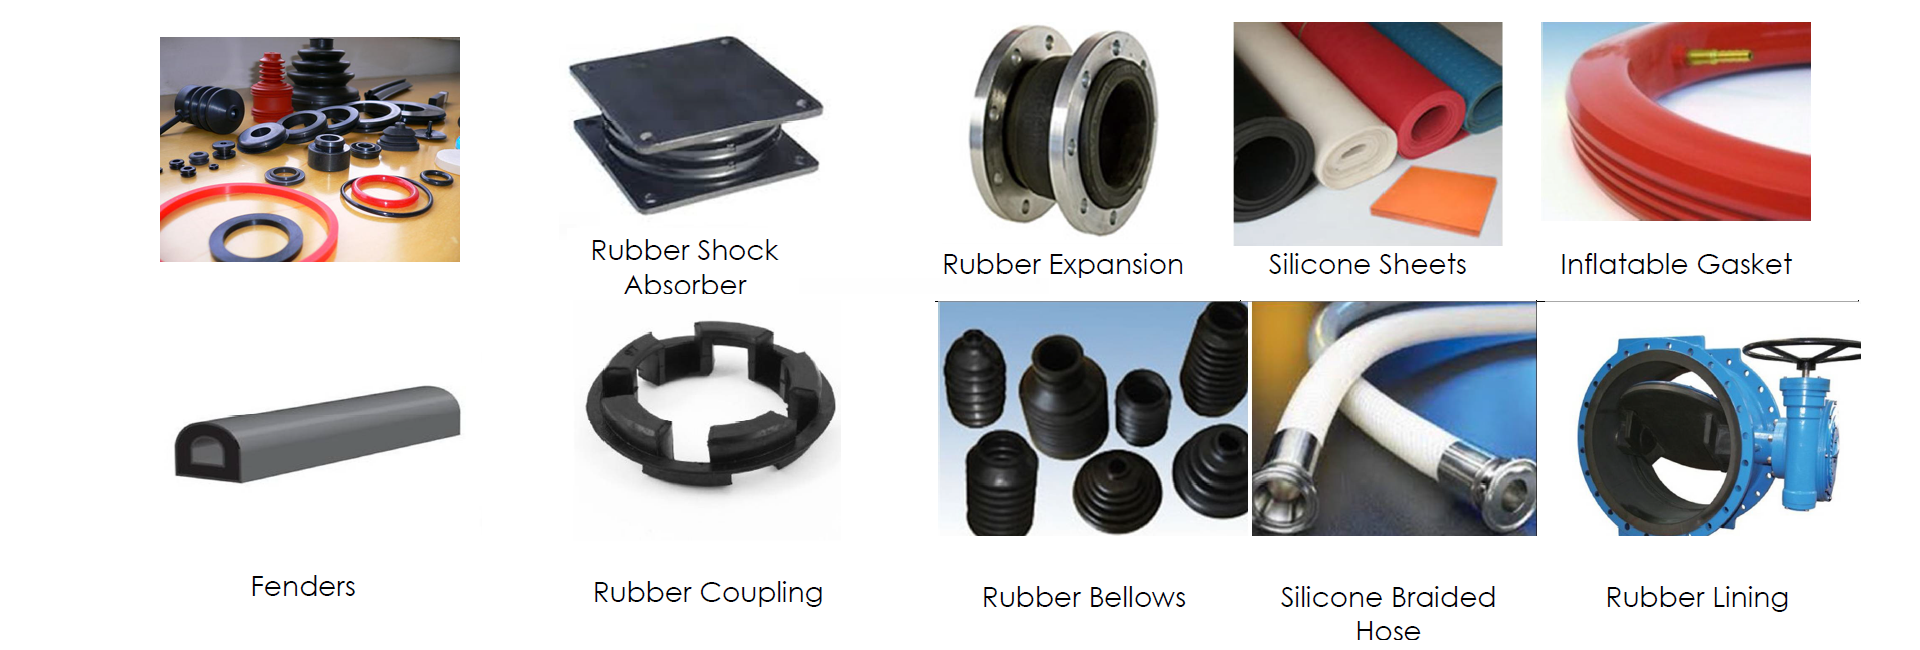 rubber-products0